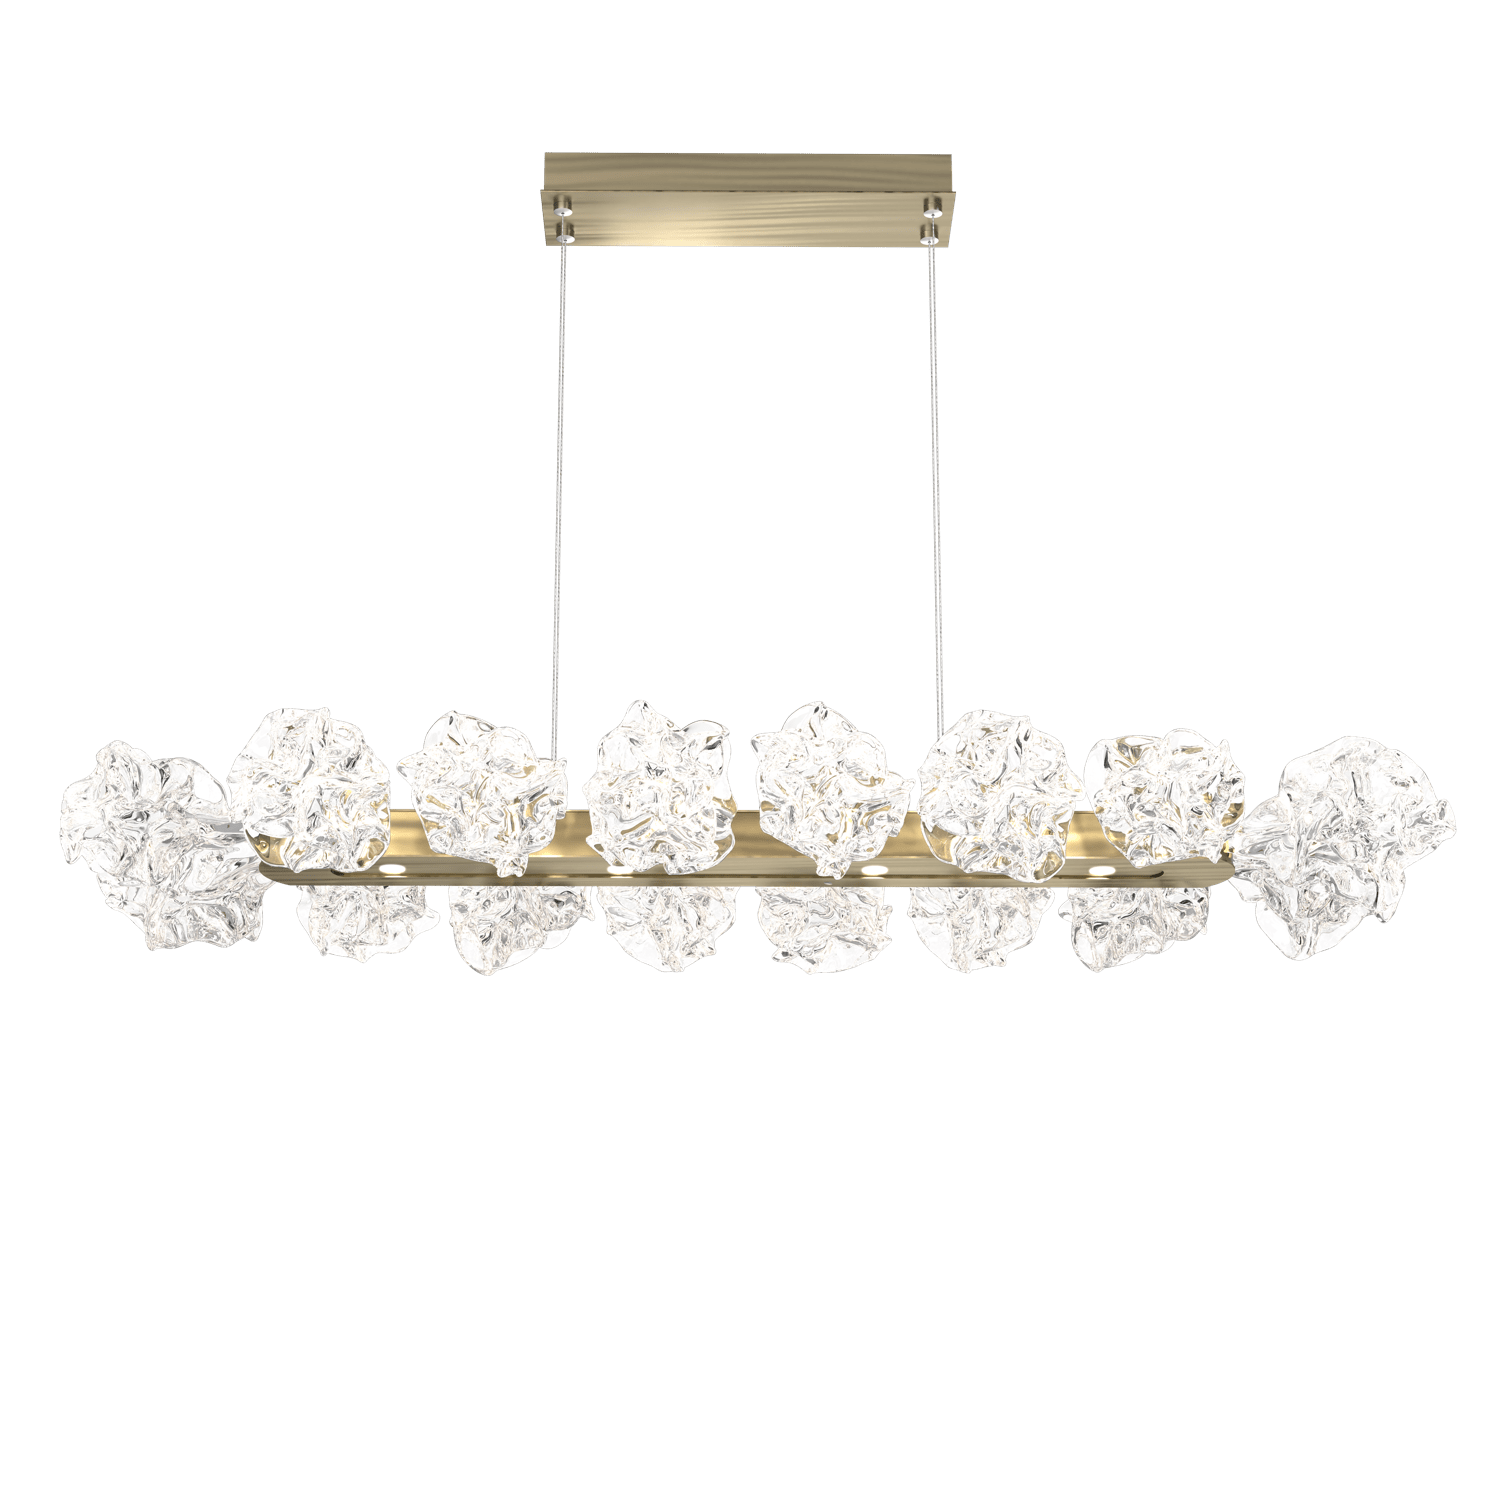 PLB0059-48-HB-Hammerton-Studio-Blossom-48-inch-linear-chandelier-with-heritage-brass-finish-and-clear-handblown-crystal-glass-shades-and-LED-lamping